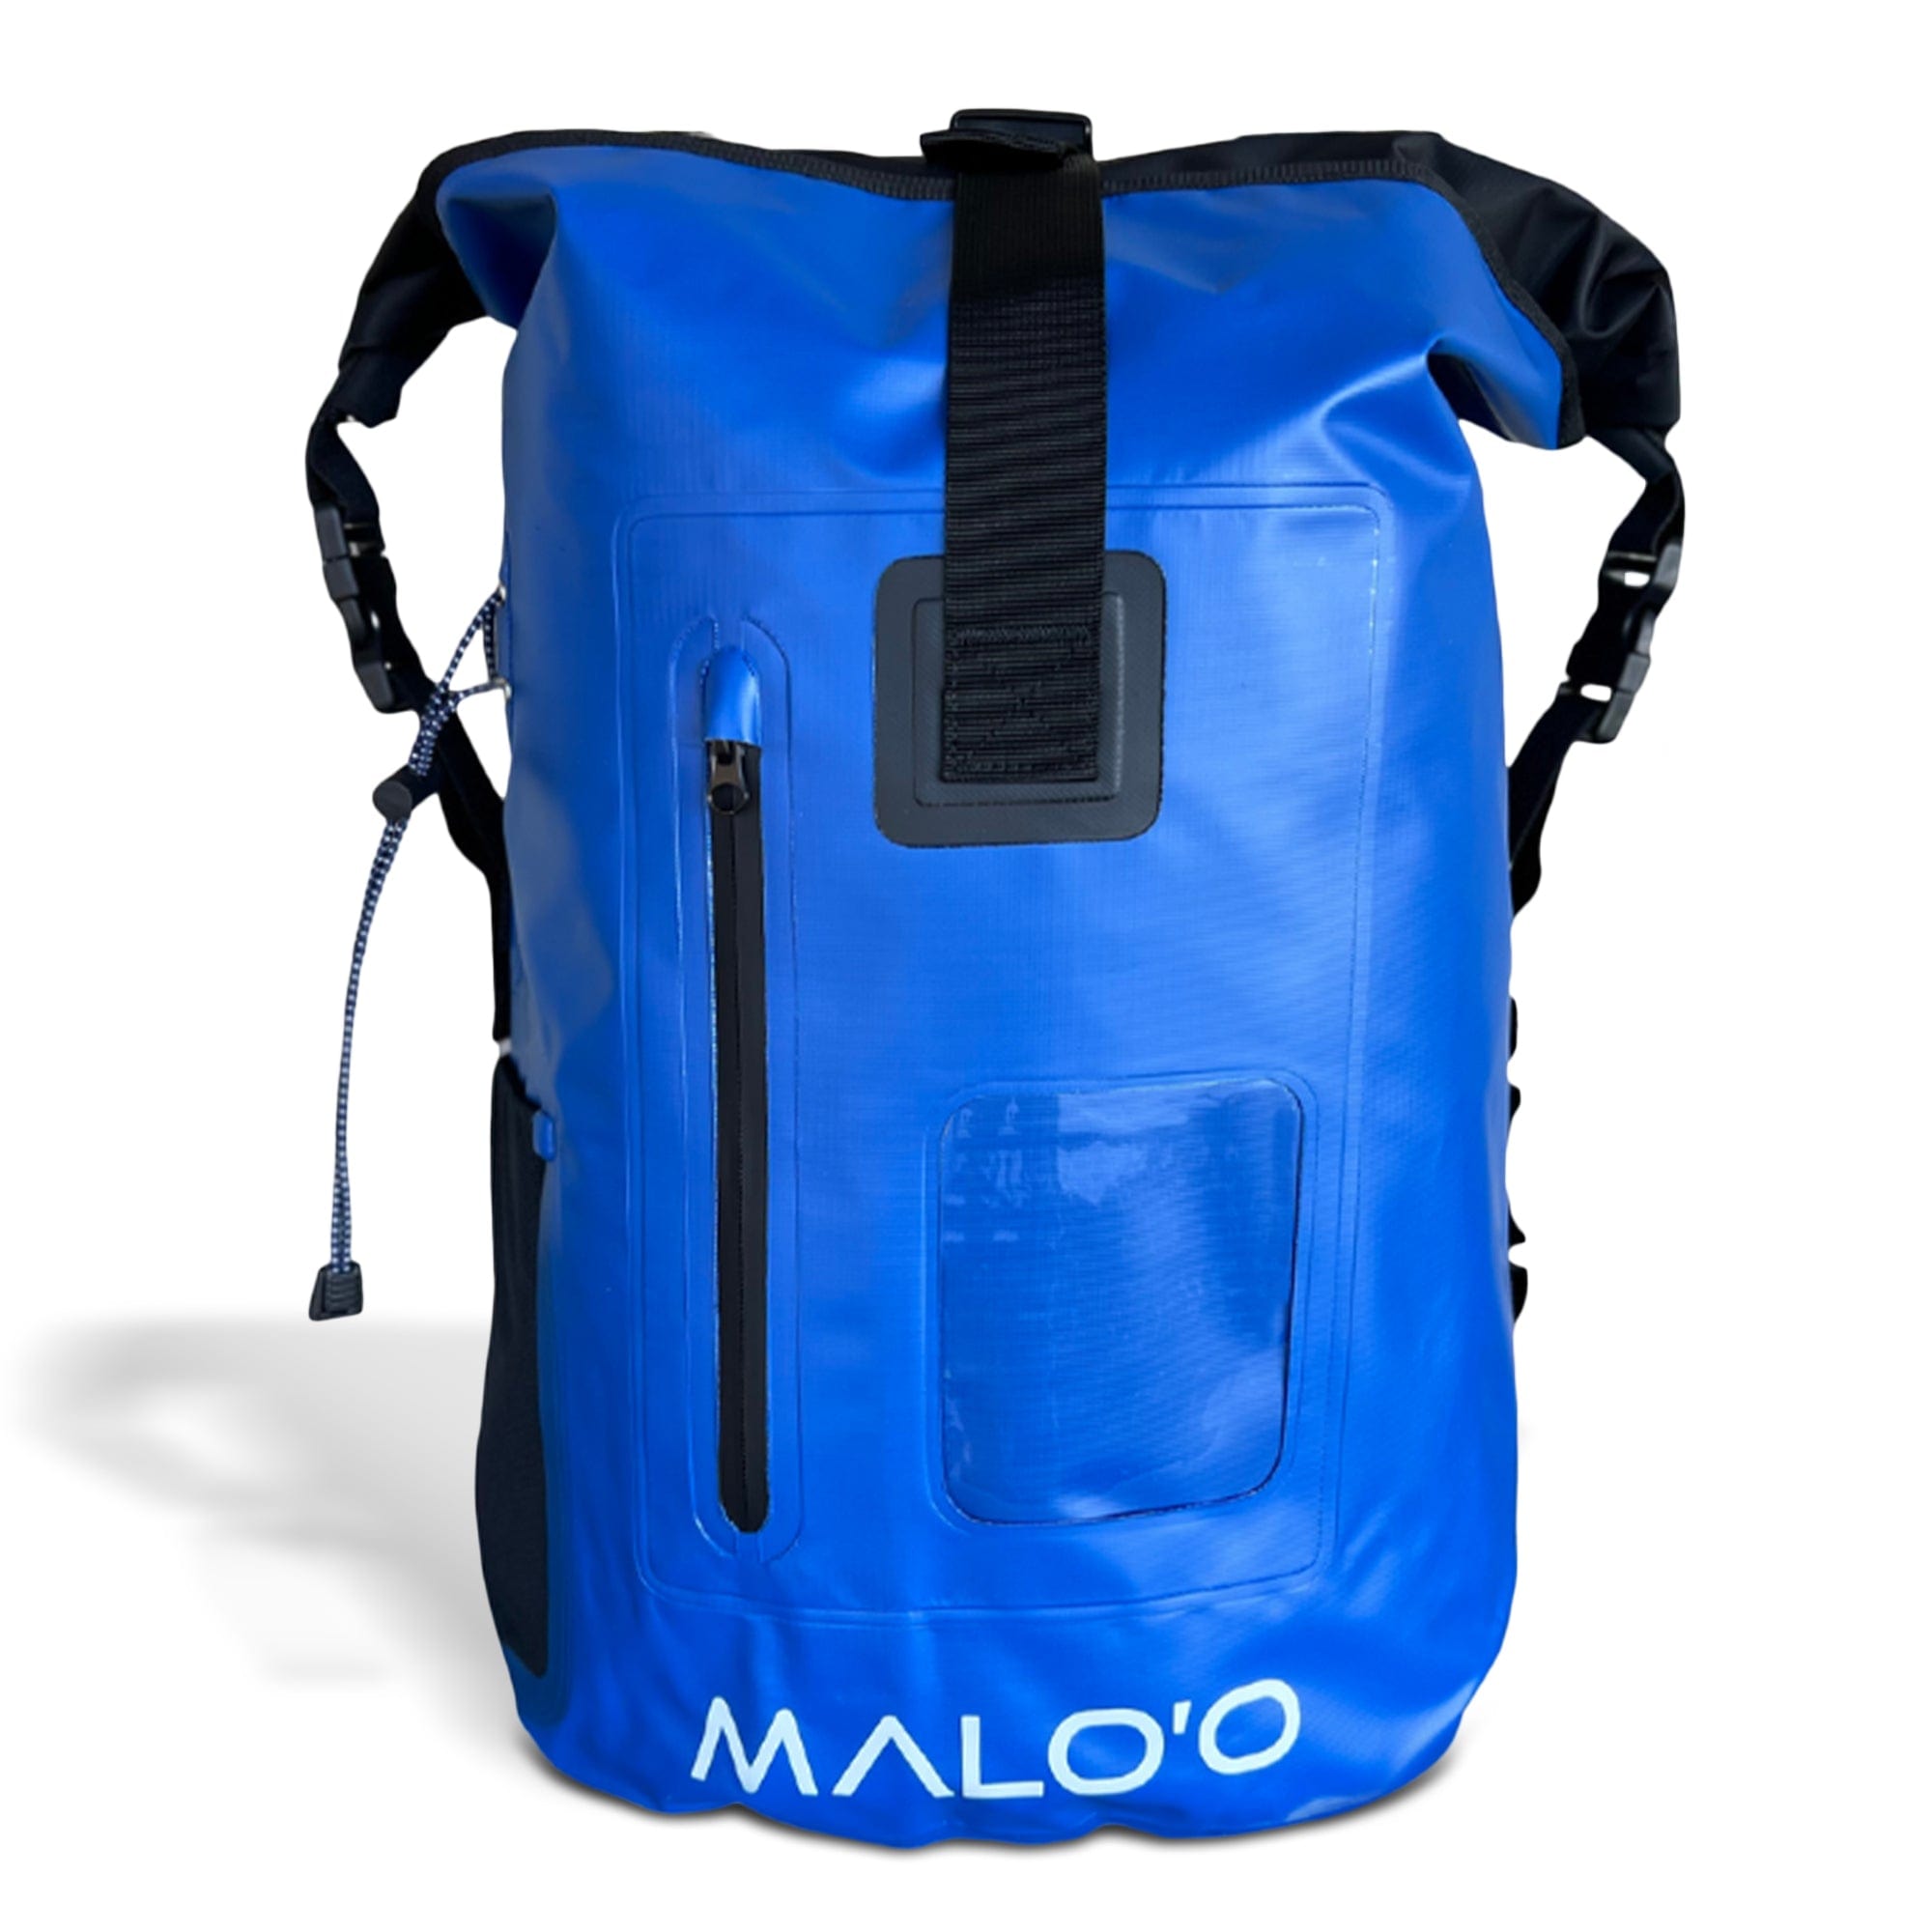 Submersible Waterproof Bag with shoulder strap - Blue